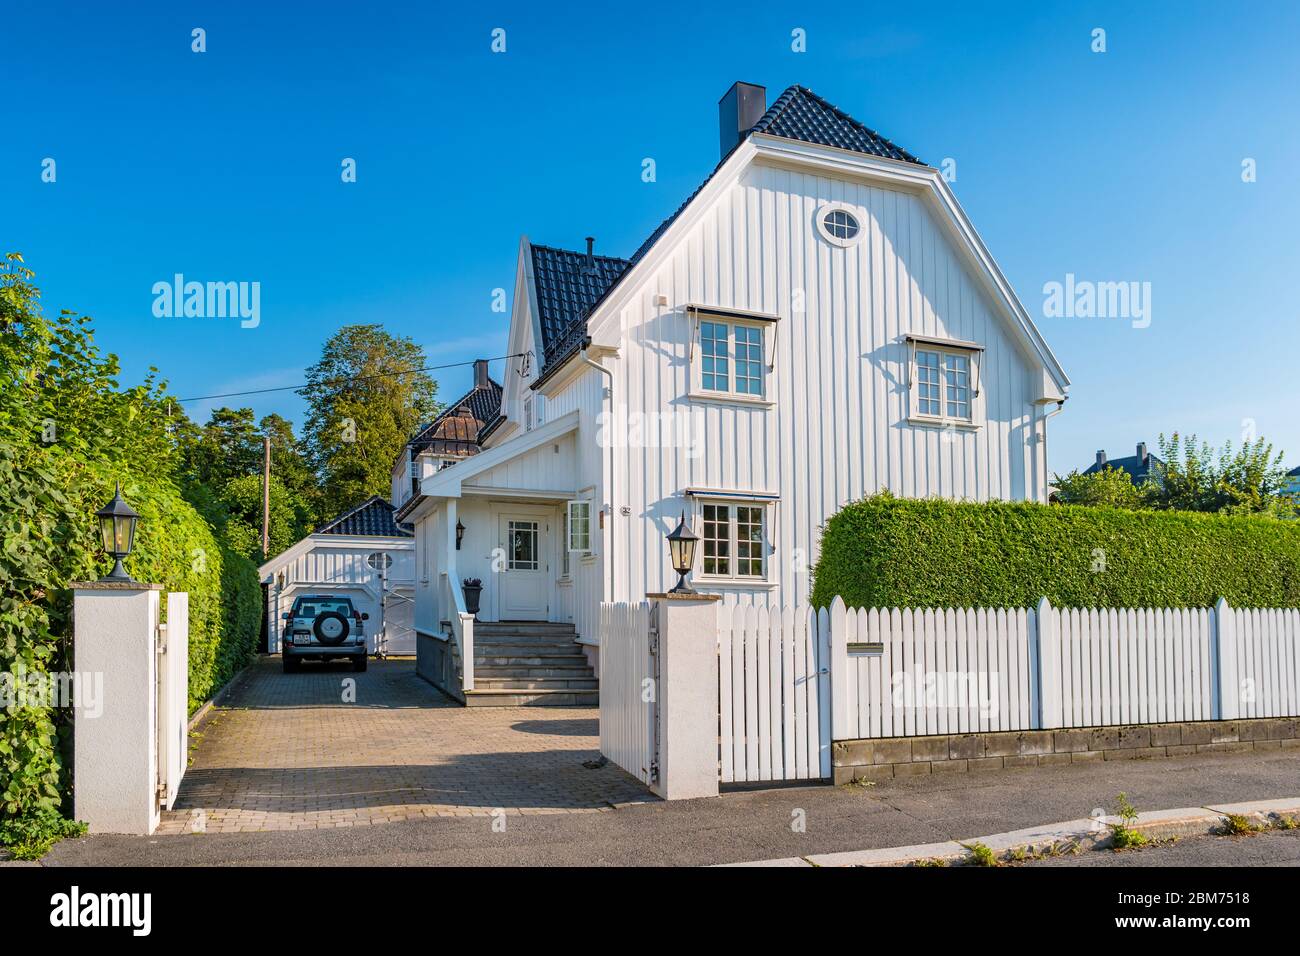 Typical detached house in Oslo Norway Stock Photo